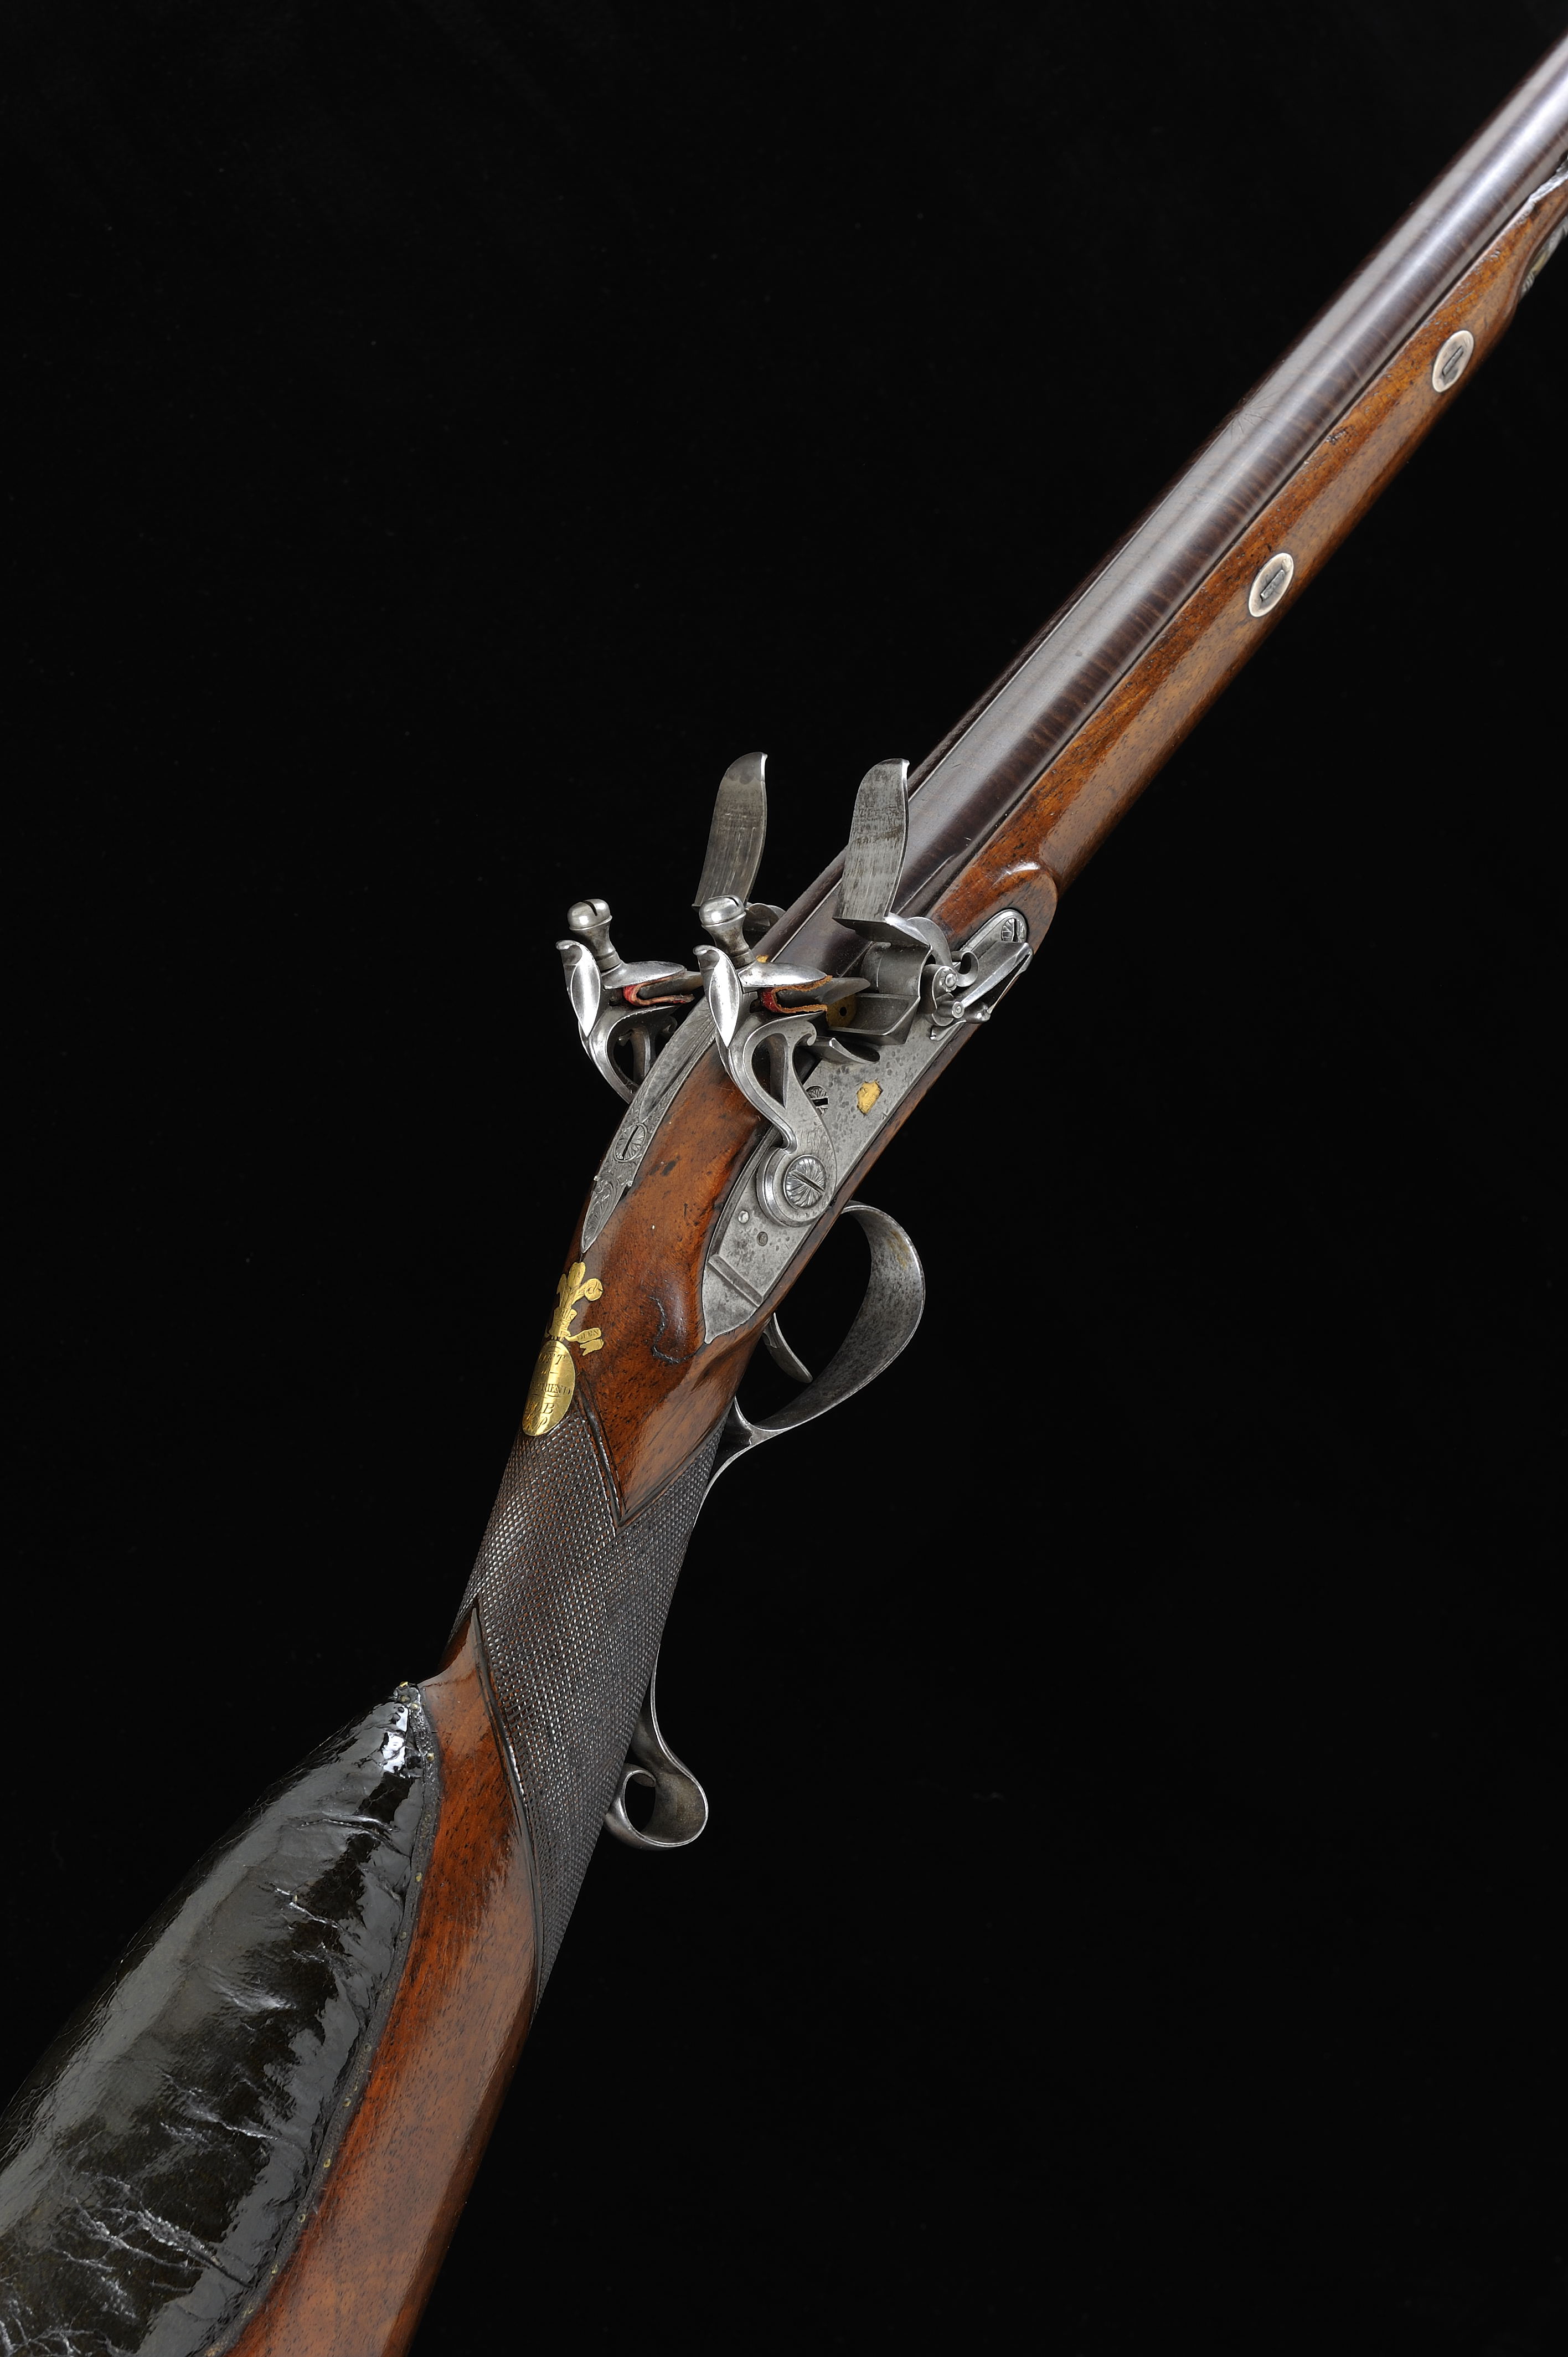 Guns made for Royalty and Nobility will be offered in Gavin Gardiner Ltd’s sale of Modern & Vintage Sporting Guns & Rifles which takes place on Tuesday, December 1, 2015 at Sotheby’s New Bond Street, London W1A 2AA.